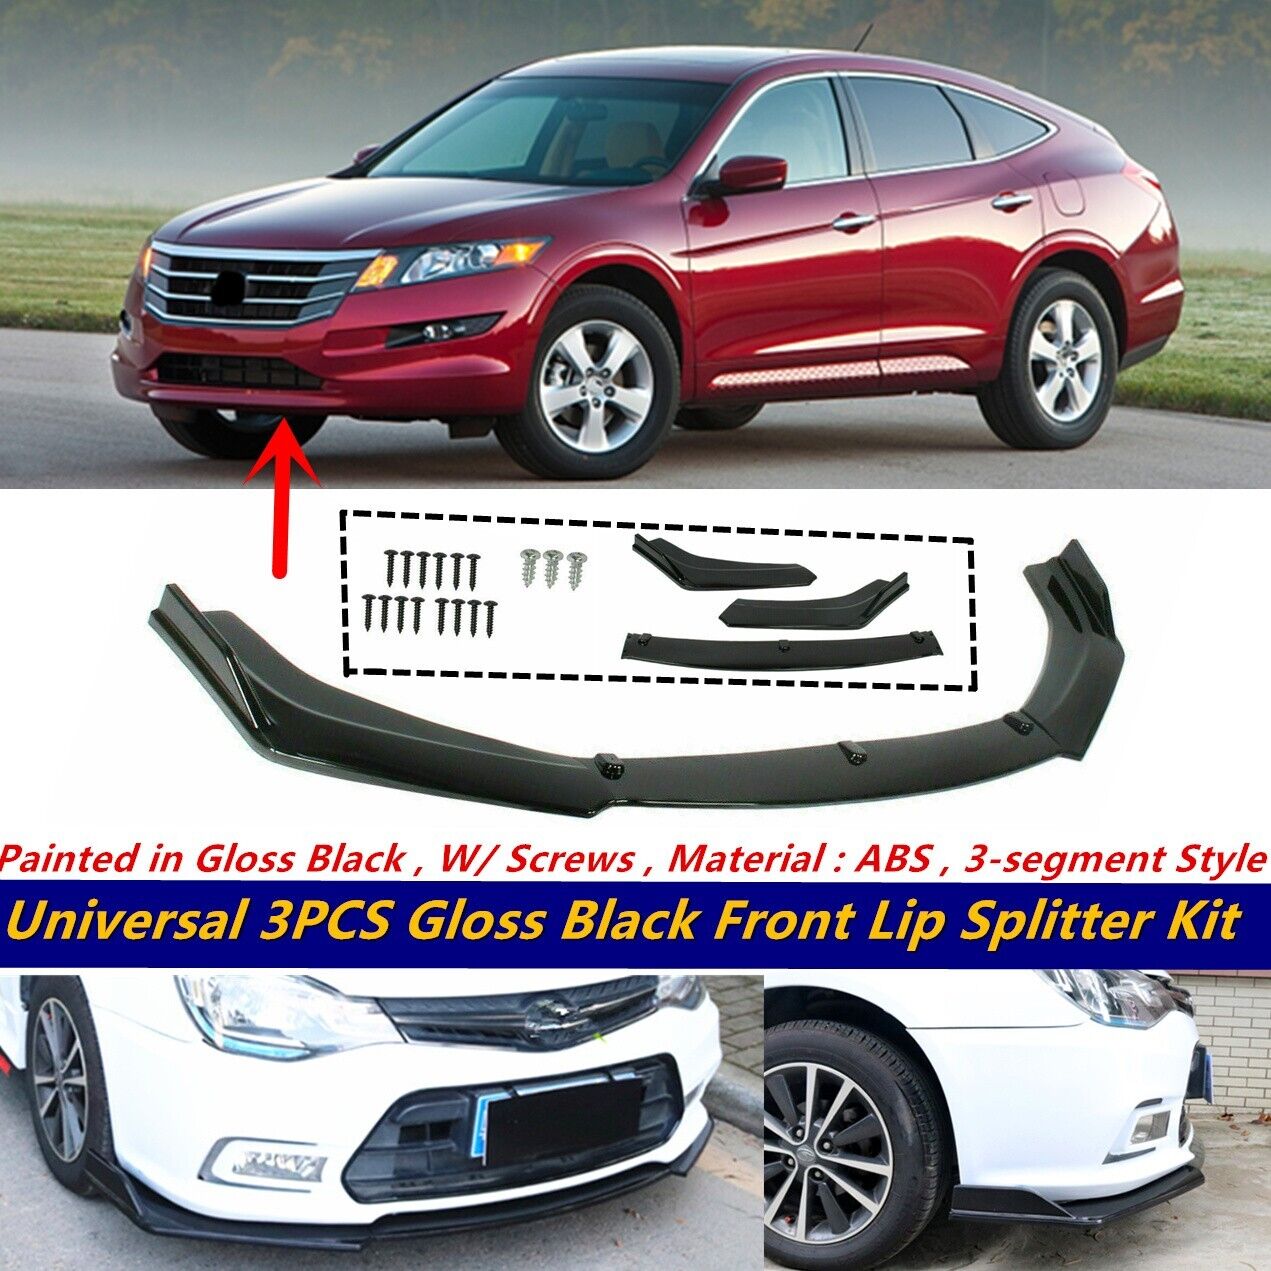 Add-on Universal For 2010-2011 Honda Accord Crosstour Front Bumper